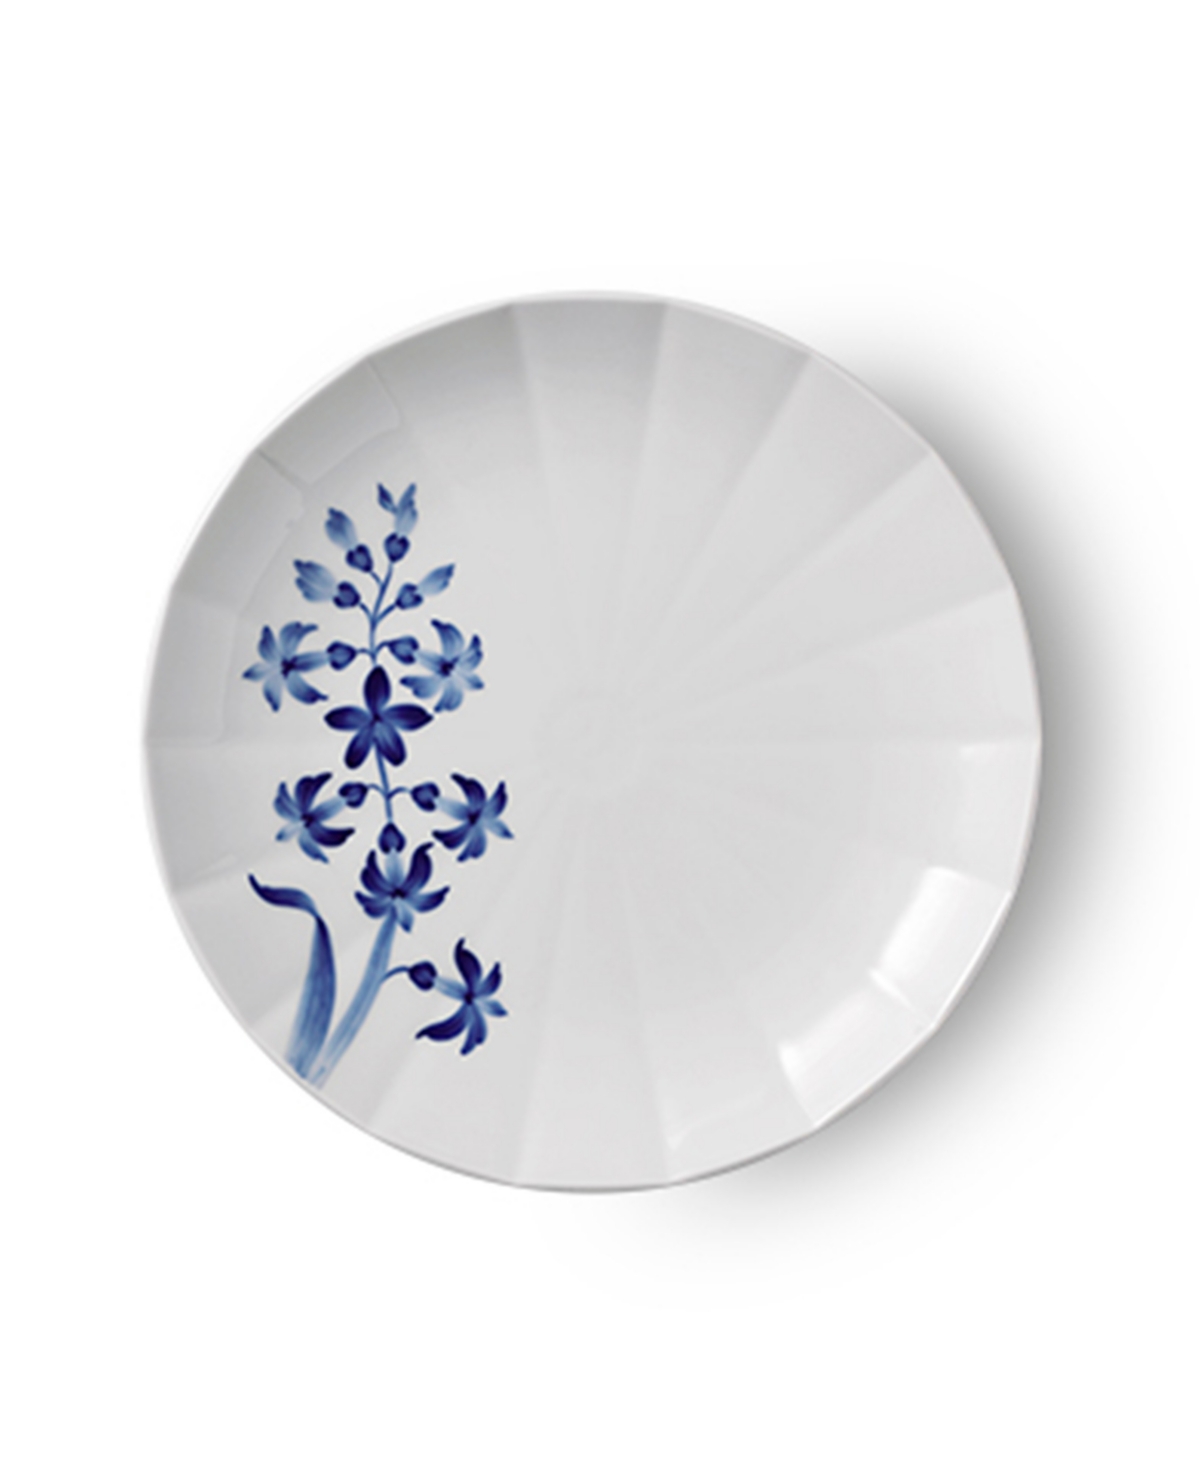 Blomst Salad Plate Hyacinth, 8.75" - Blue and White